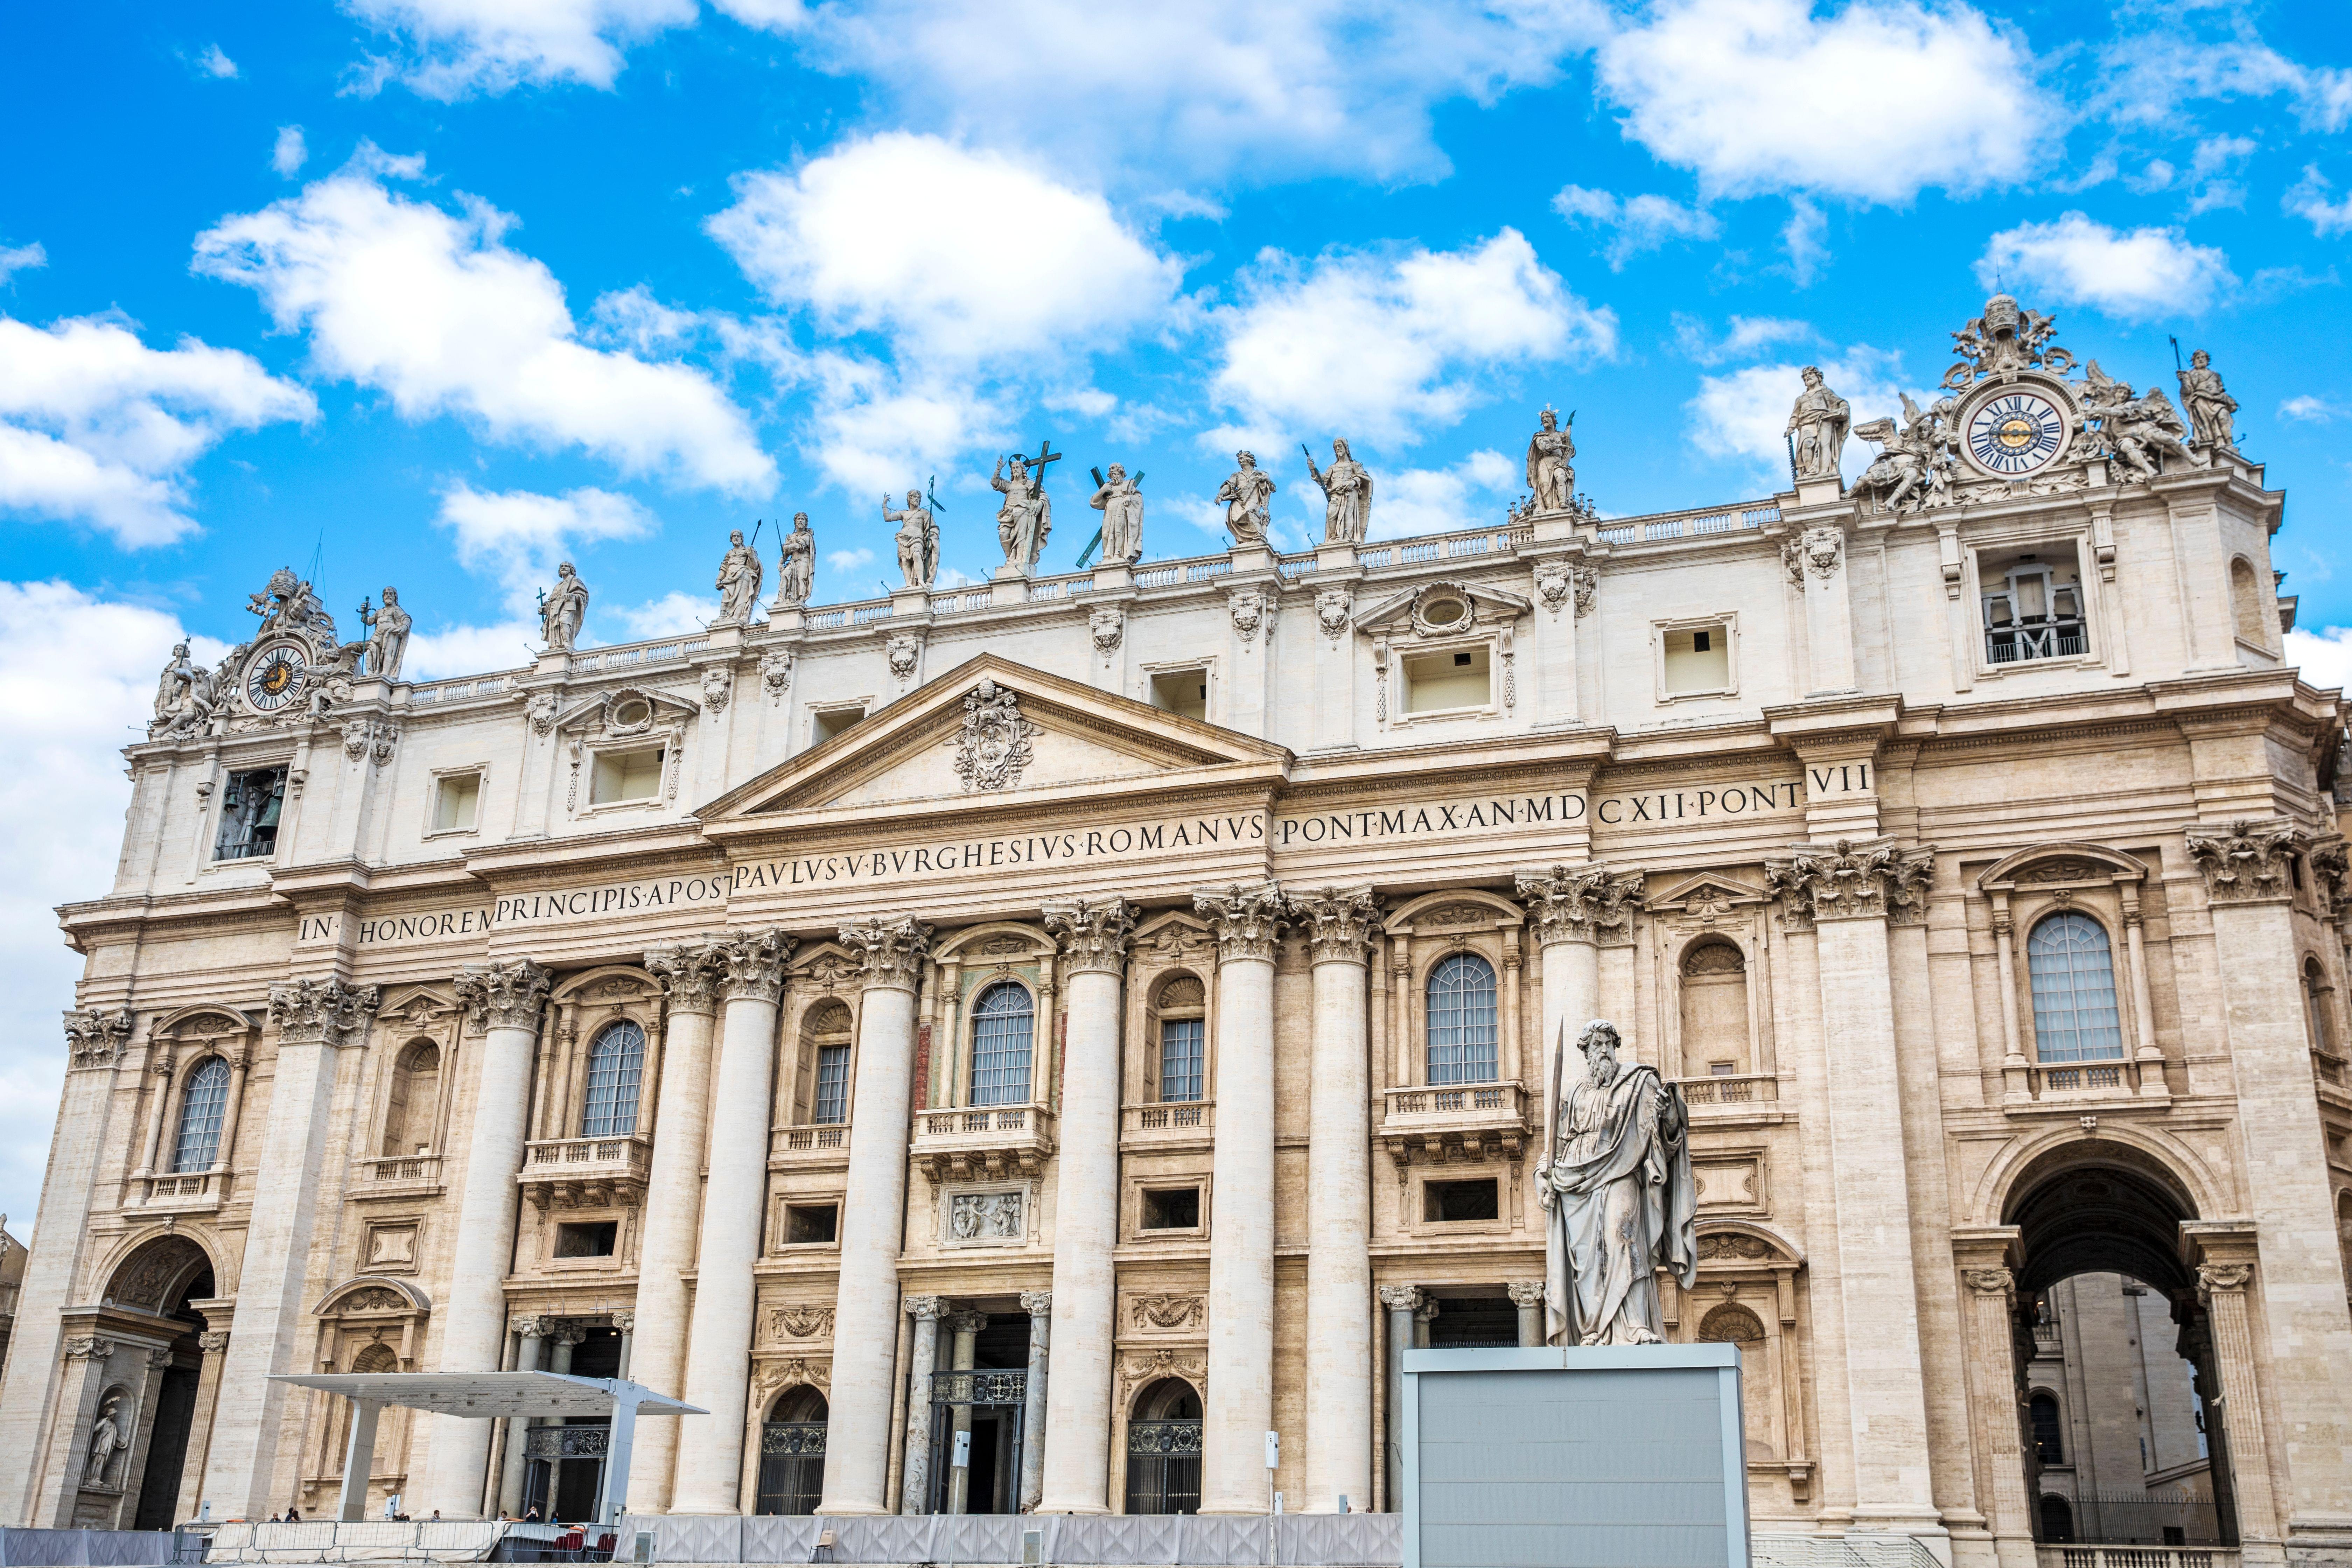  About Vatican Museums